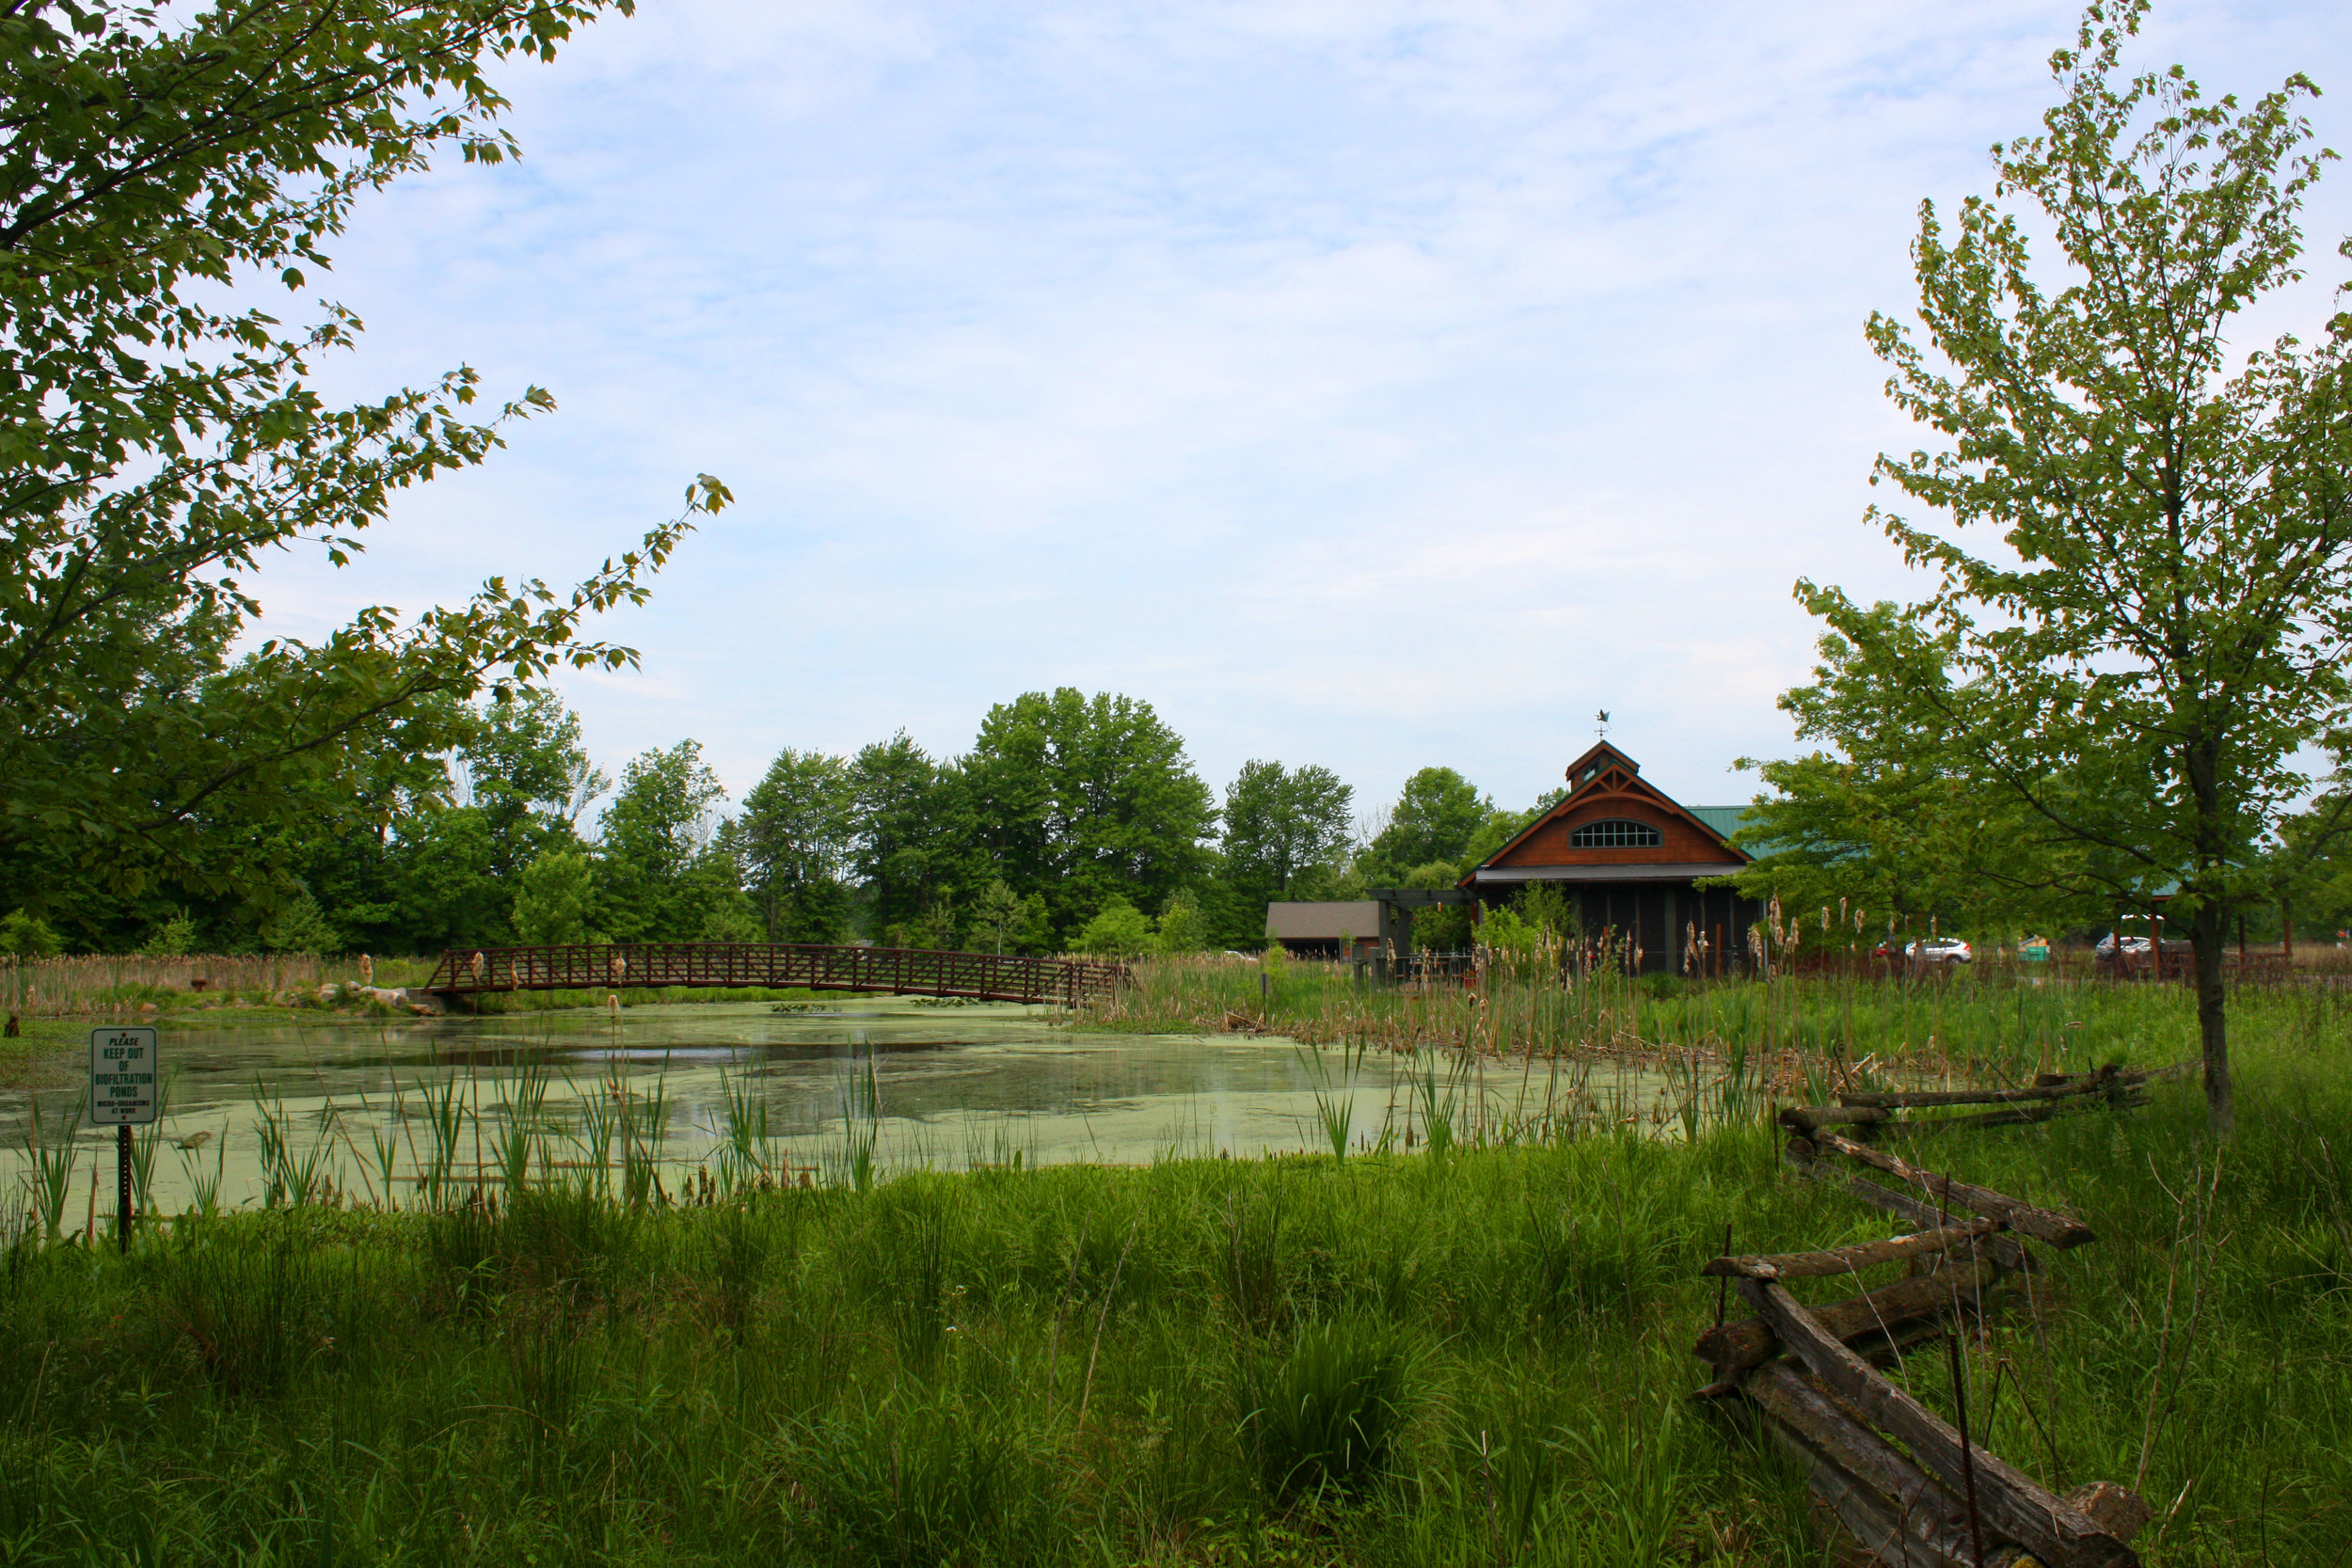 Pedestrian bridge and pond located just outside of the Perry F. Johnson Wetland Center